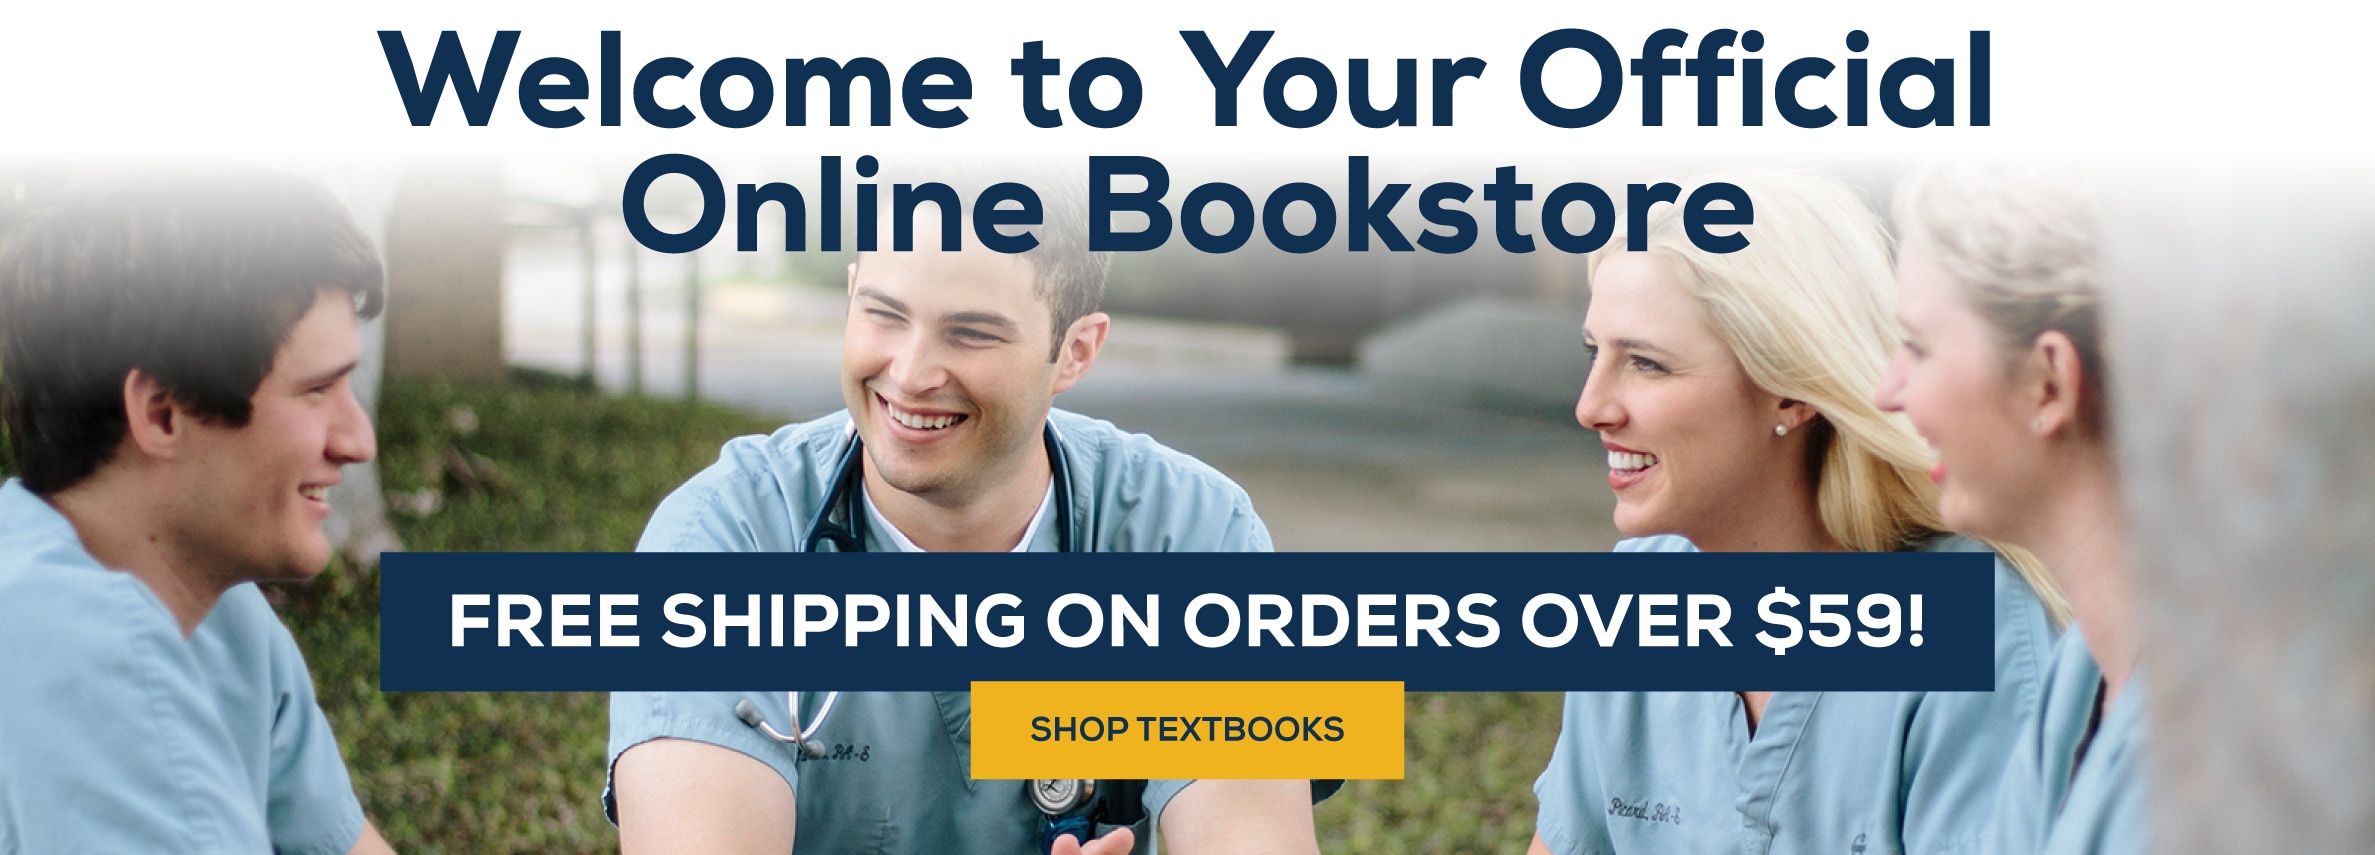 Welcome to Your Official Online Bookstore. Free Shipping on orders over $59. Shop Textbooks.